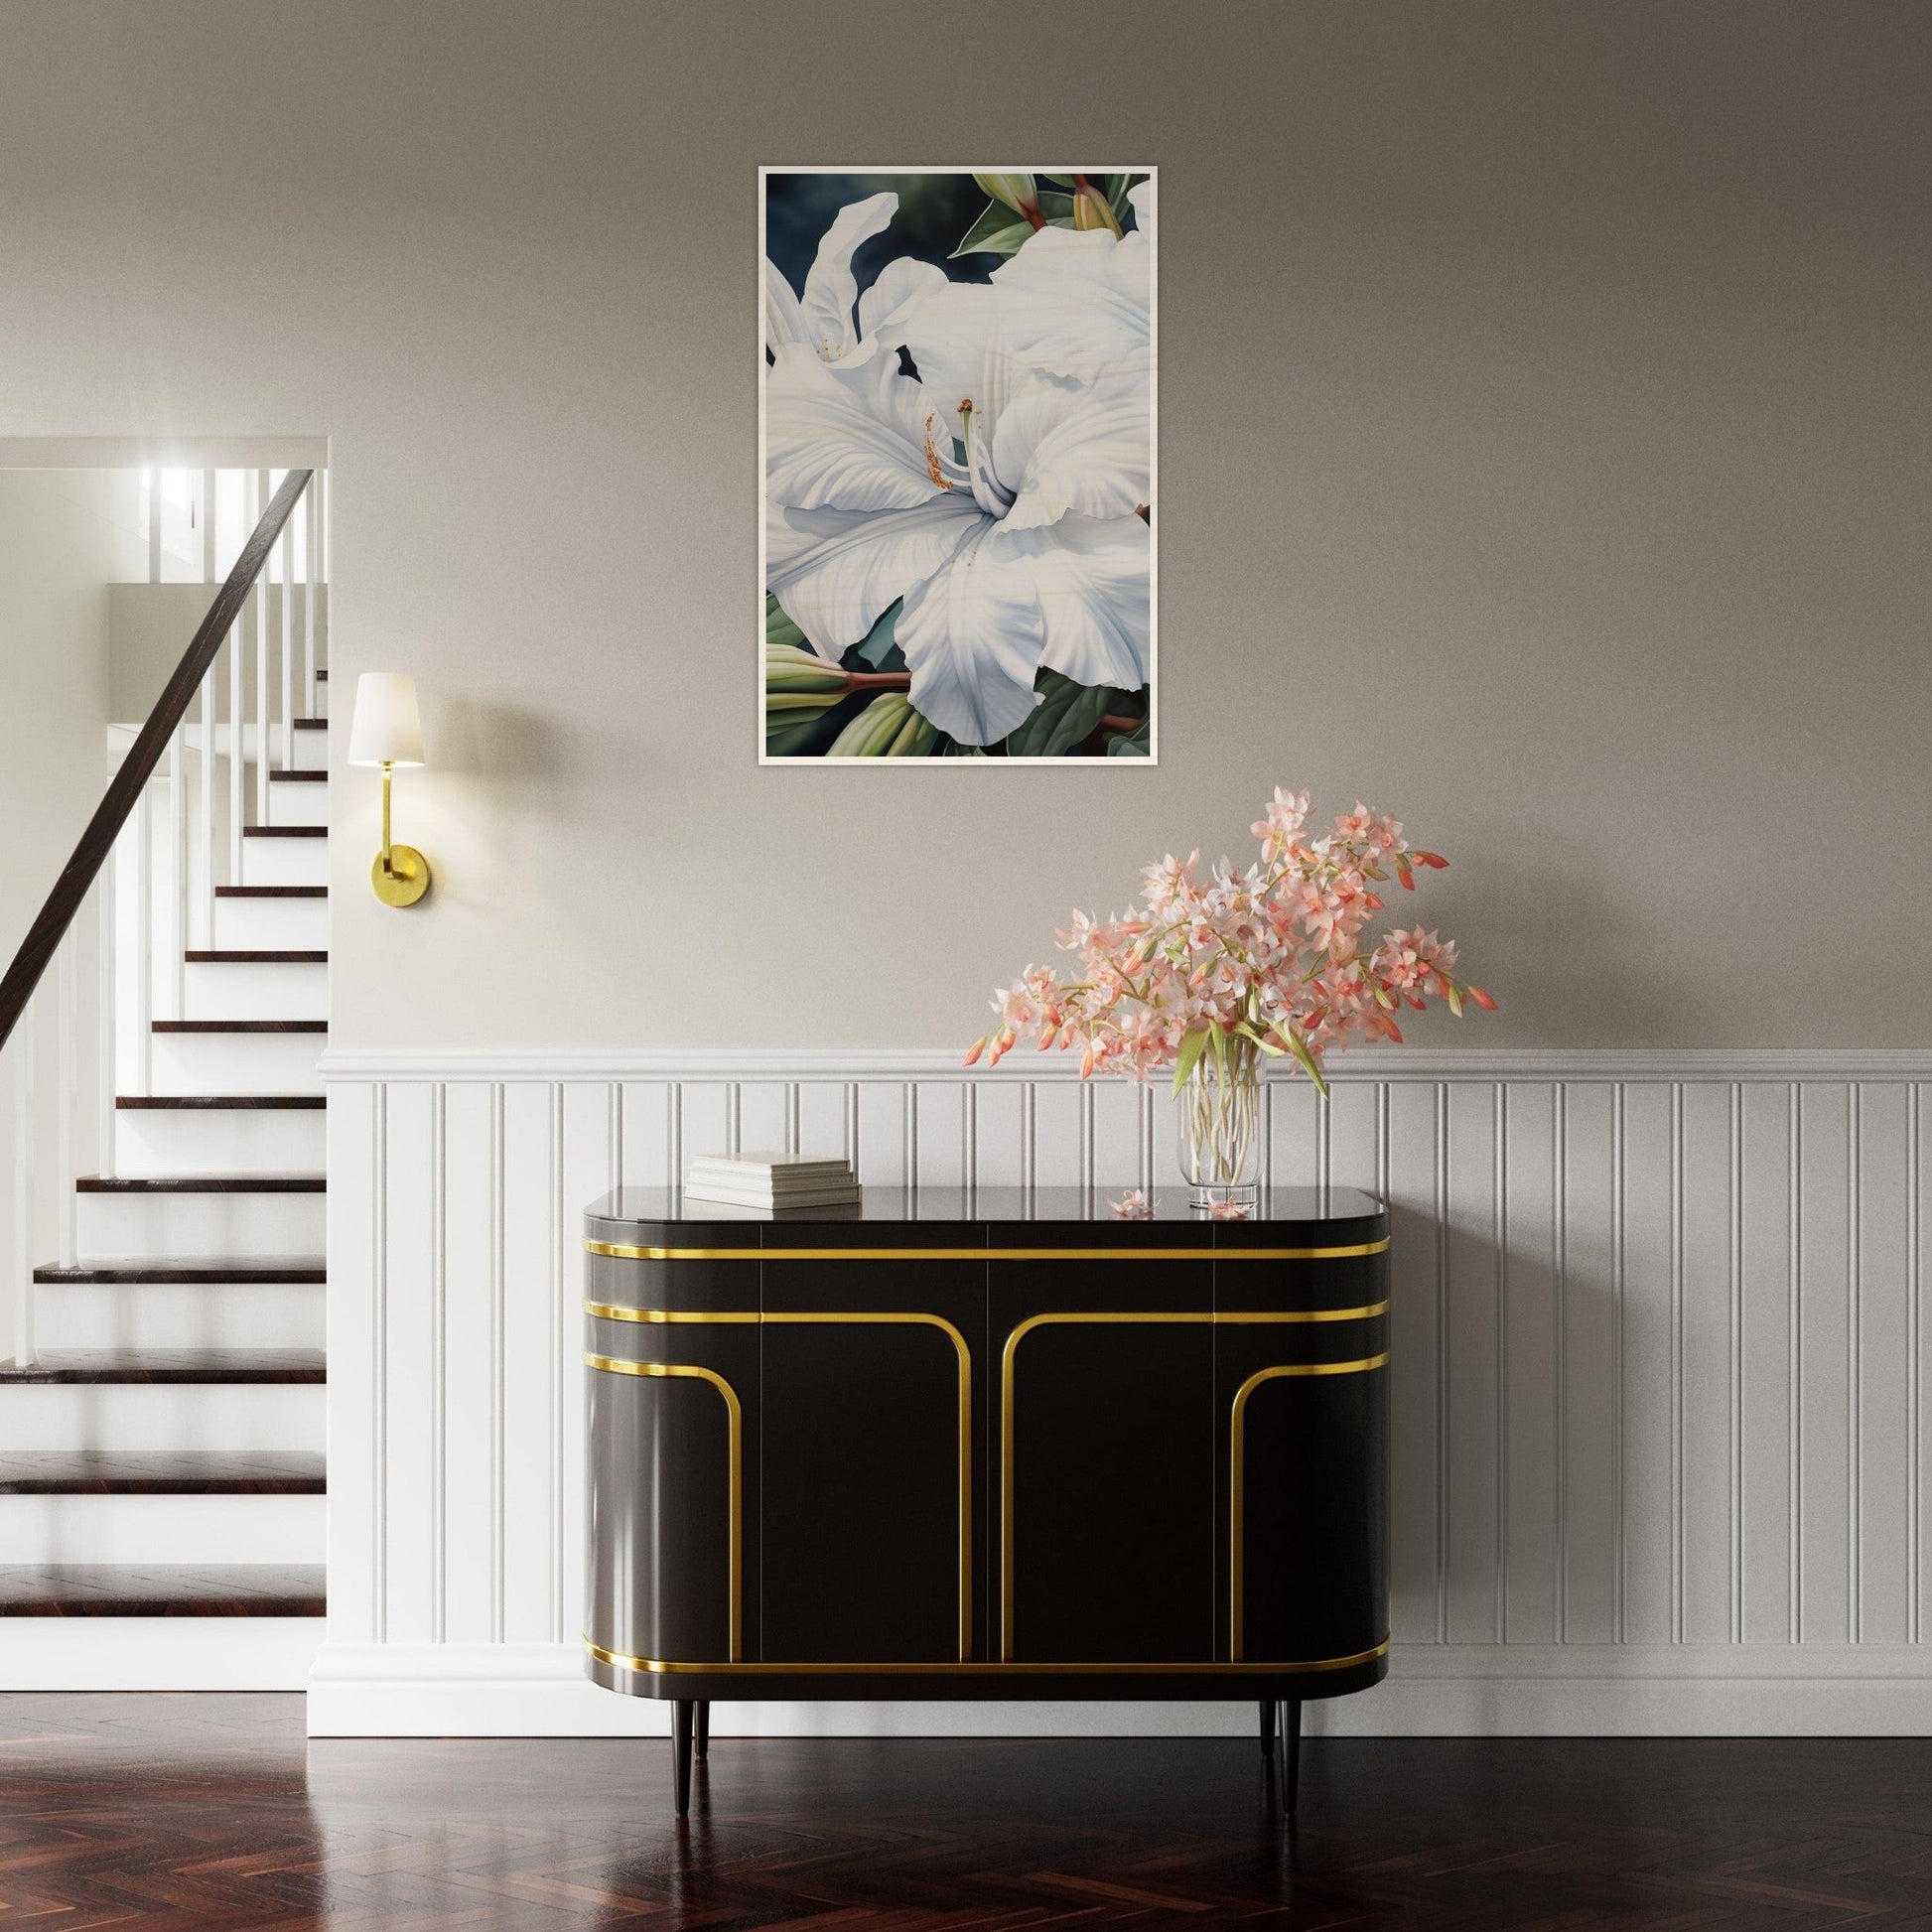 A fashion wall art poster featuring White And Green - Wood Prints on a wooden board, perfect to transform your space.